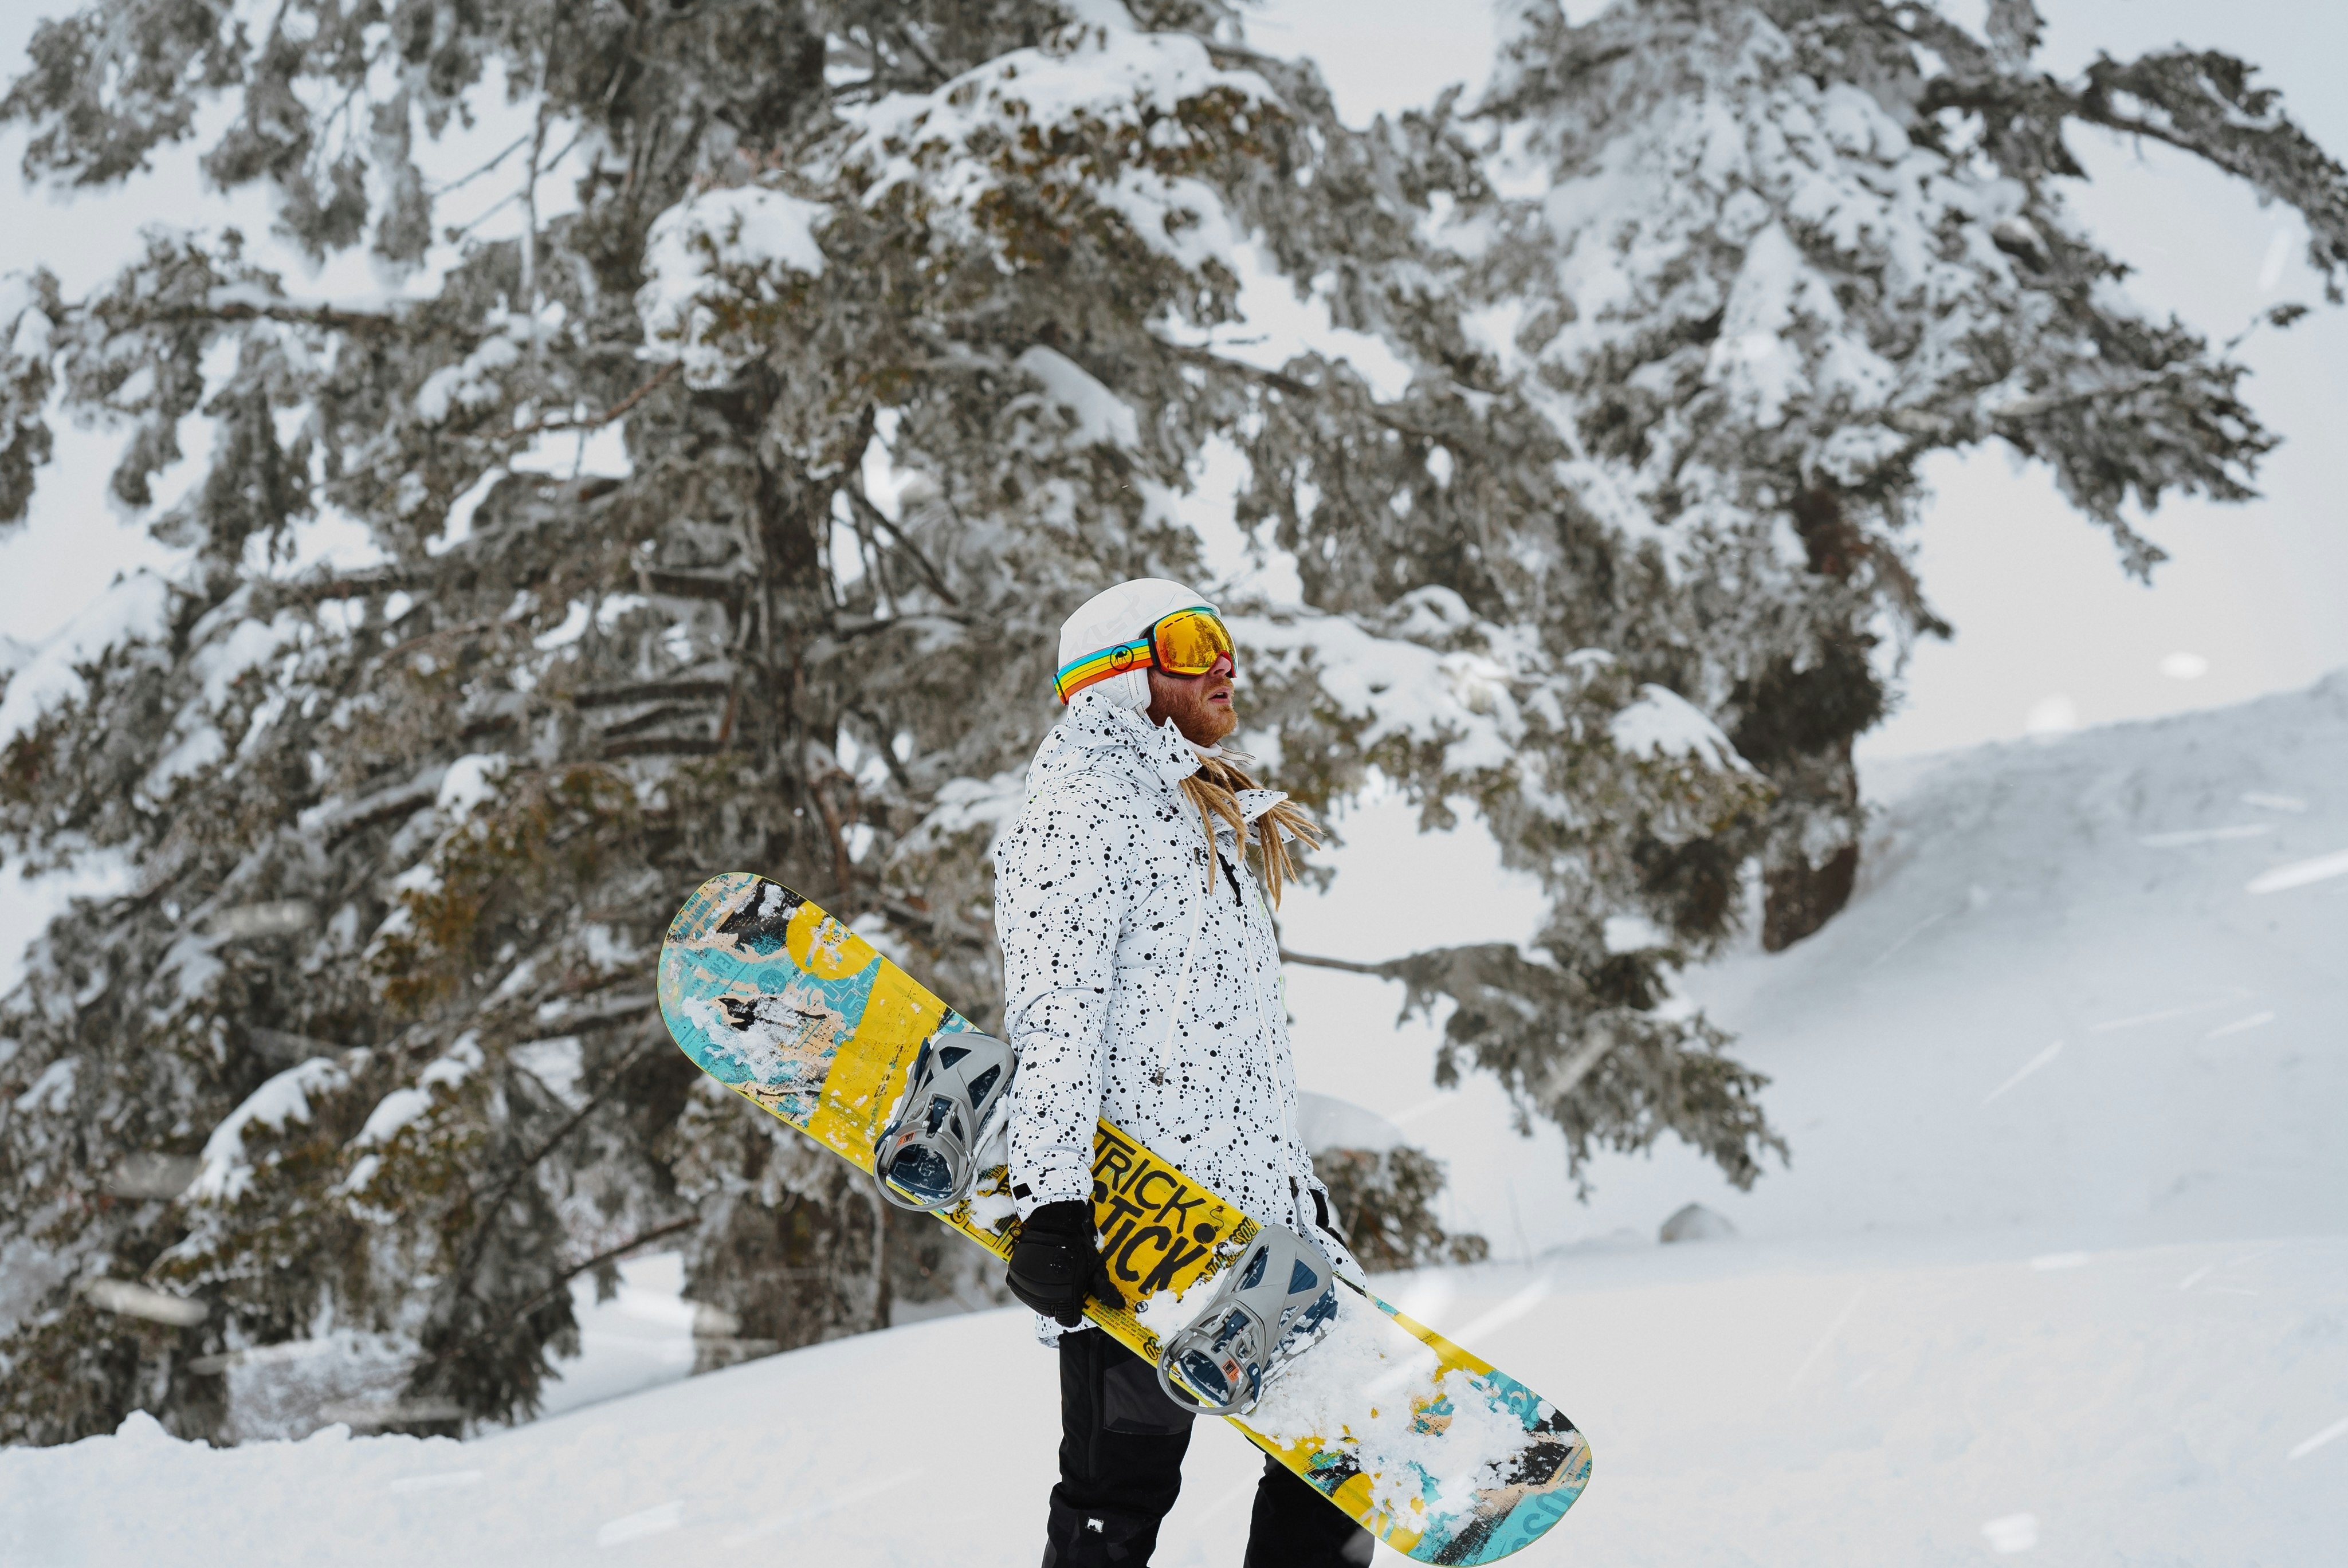 person in white and blue jacket and black pants riding on snowboard during daytime